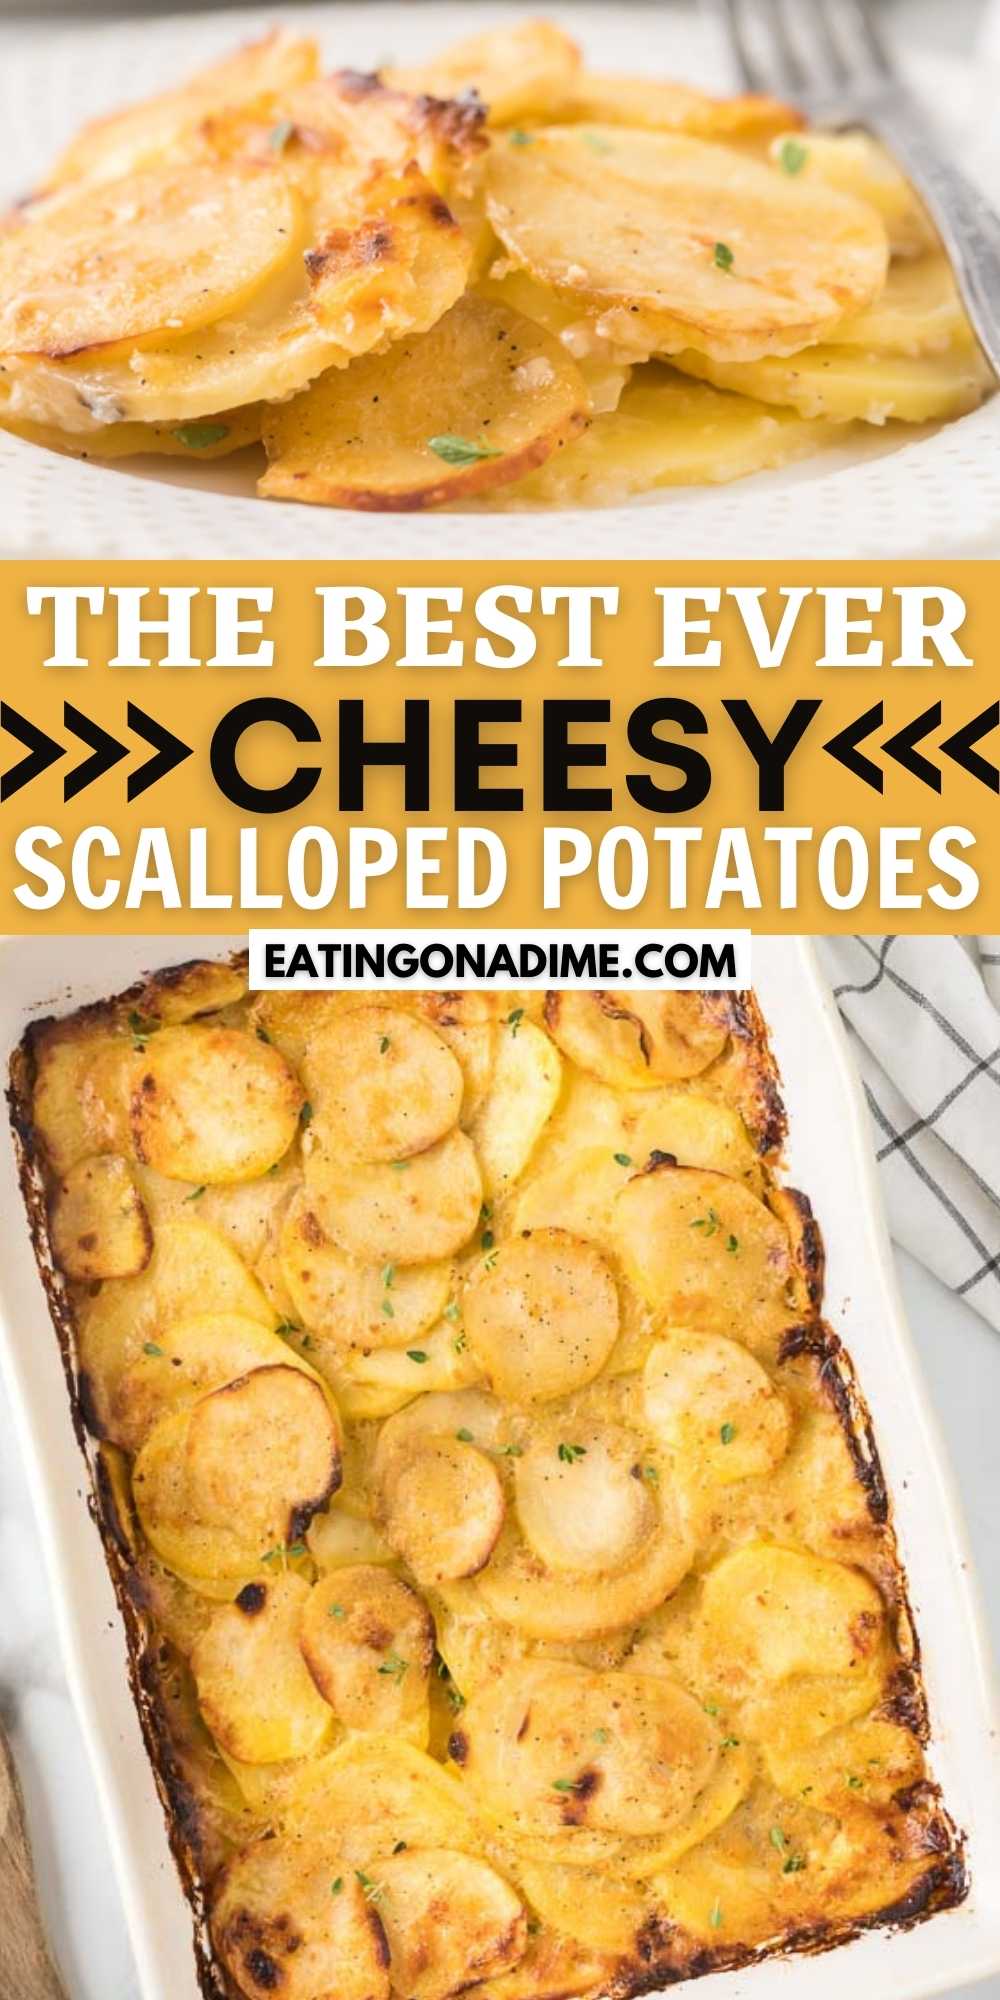 Everyone will love with this easy side dish recipe! These easy Cheesy Scalloped Potatoes have the best cheese covering every potato in this recipe. Make this for Thanksgiving dinner, Christmas or any special occasion!  #eatingonadime #sidedishreipes #potatoreipes #scallopedpotatoes #cheesypotatoes #holidayrecipes 
